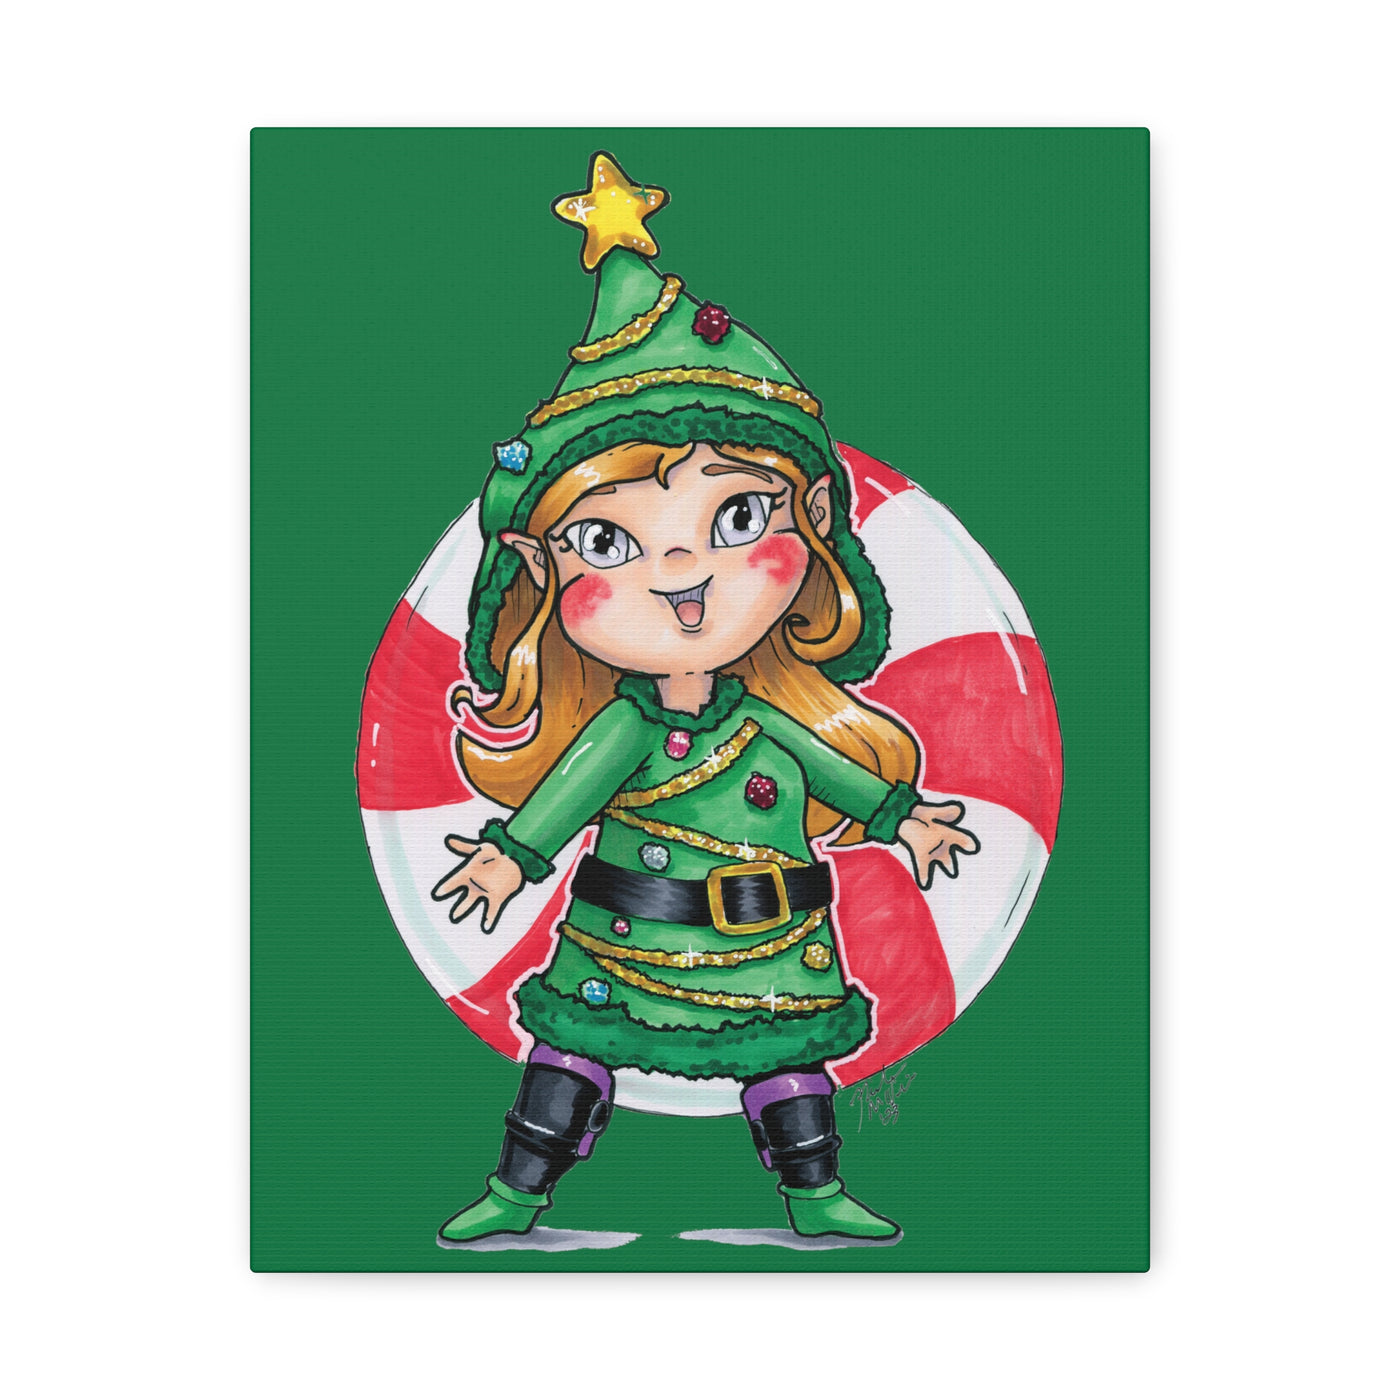 Nicklette the Elf Holiday Print